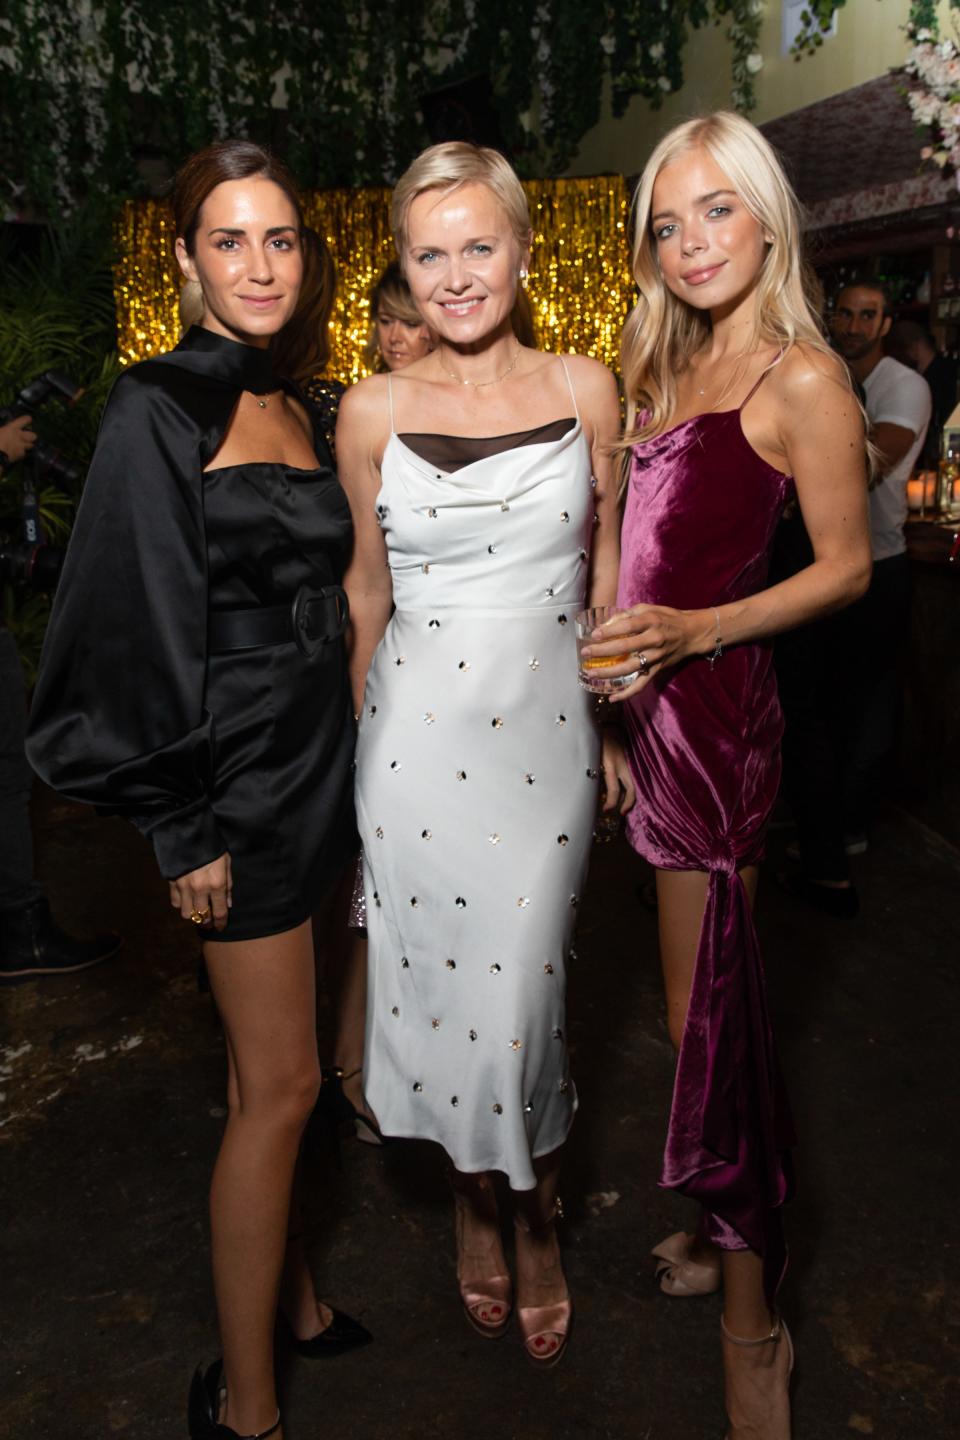 The stylish crowd at Jimmy Choo’s New York Fashion Week bash were treated to dinner and a show, thanks to Alessandro Ristori & the Portofinos.